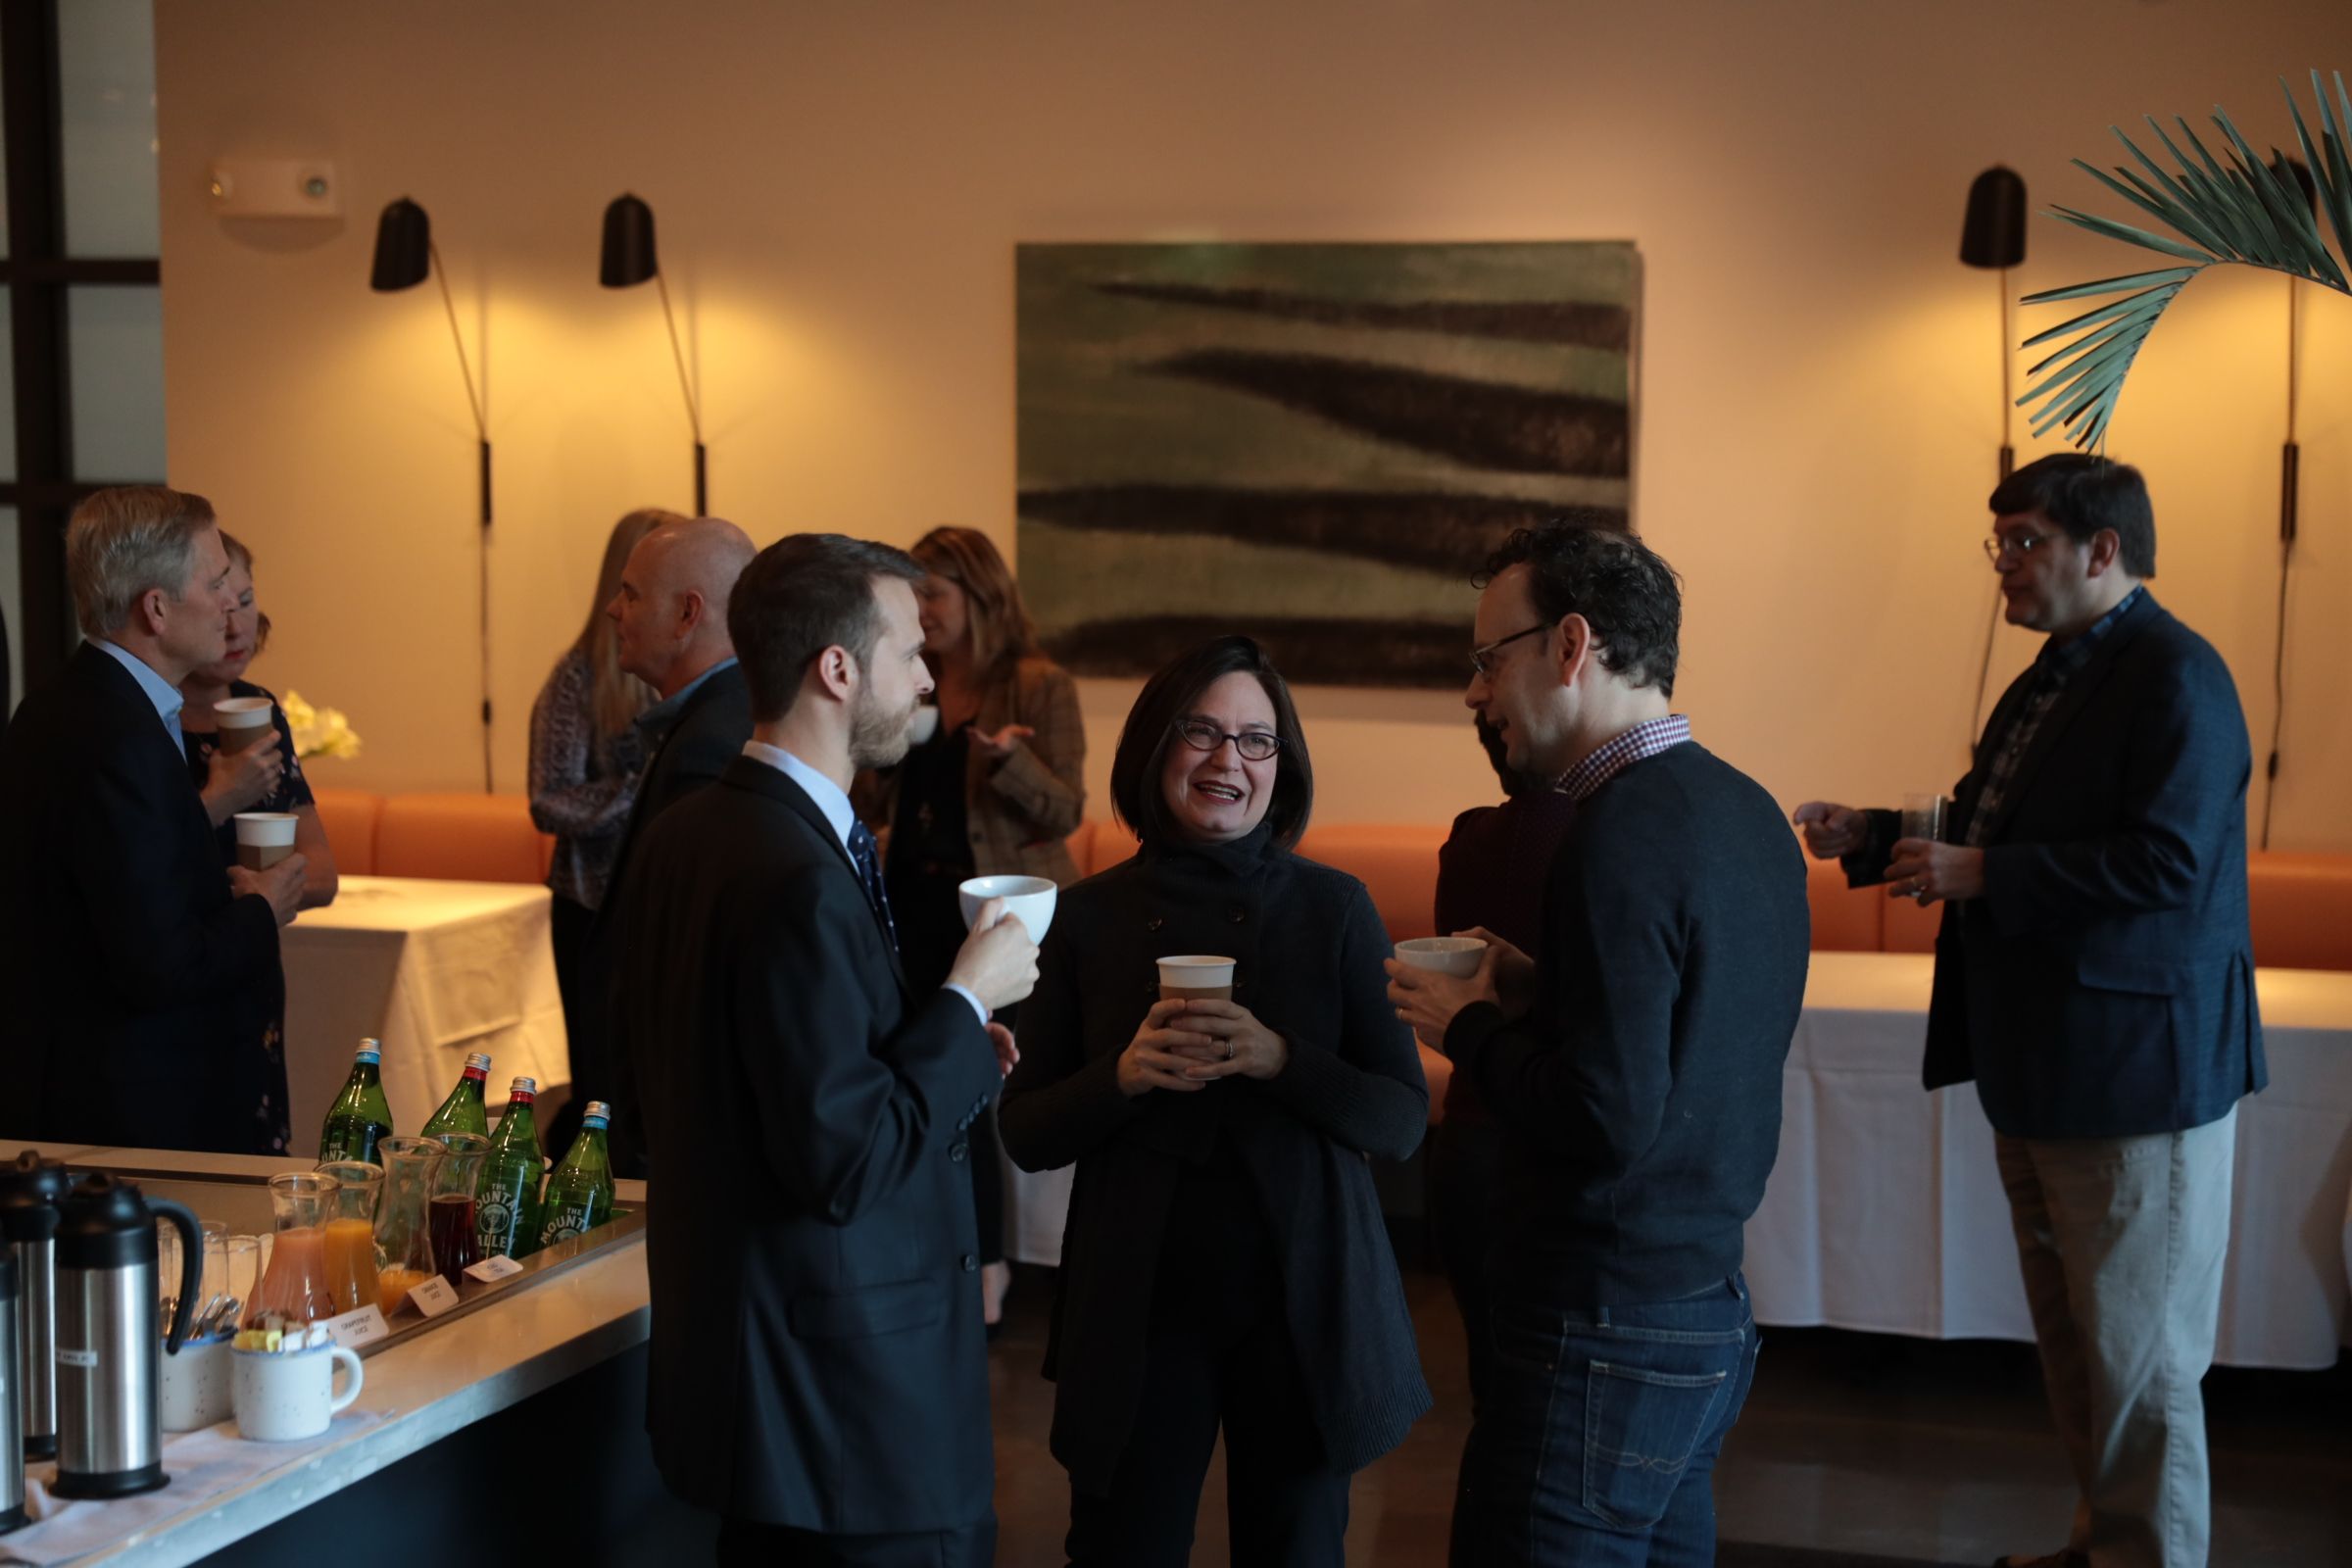 Guests chatting before the breakfast begins. 